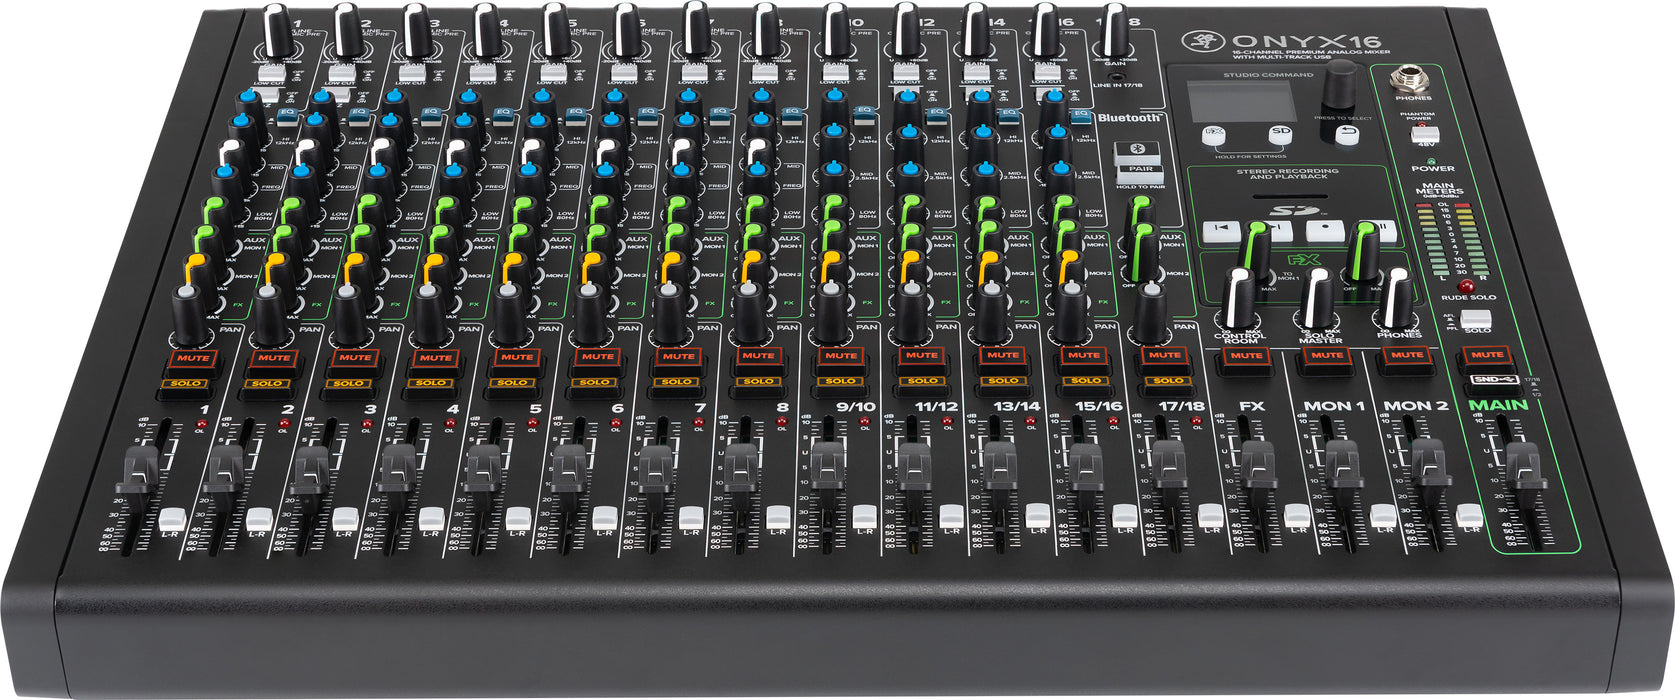 Mackie 16-Channel Premium Analog Mixer with Multi-Track USB recording